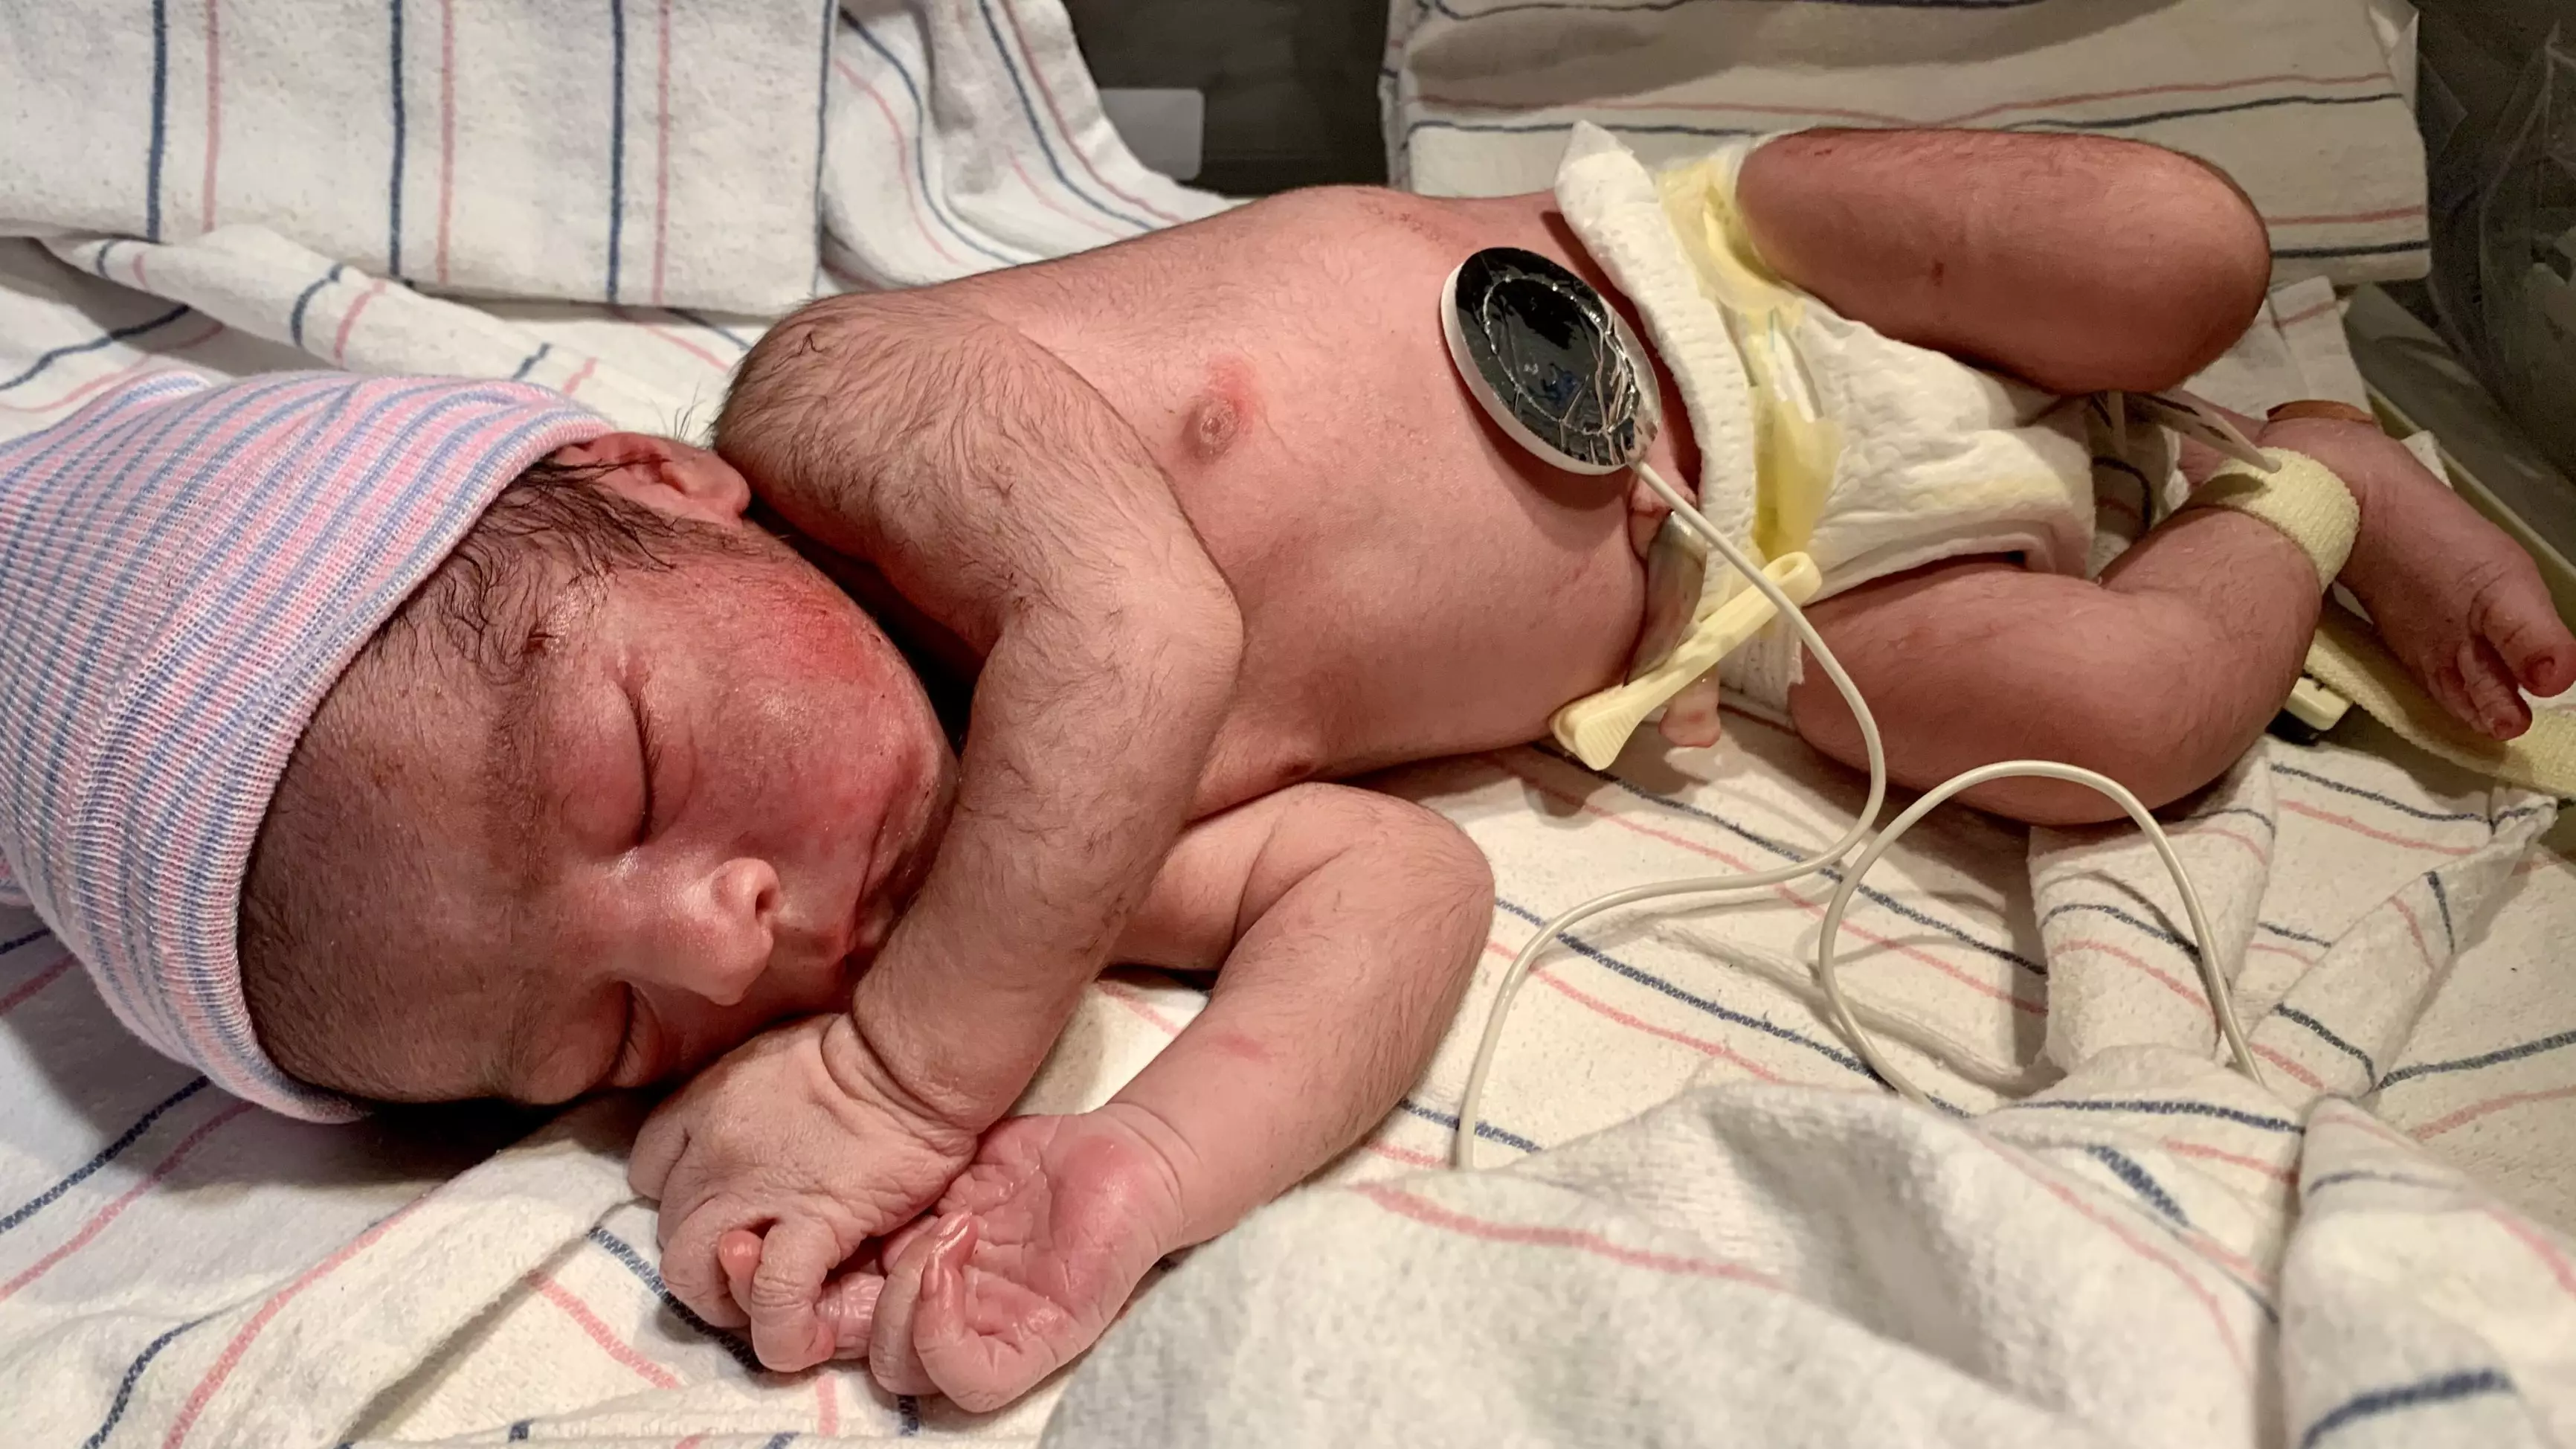 Parents Shocked As 'Mini Wolverine' Baby Born Covered In Hair